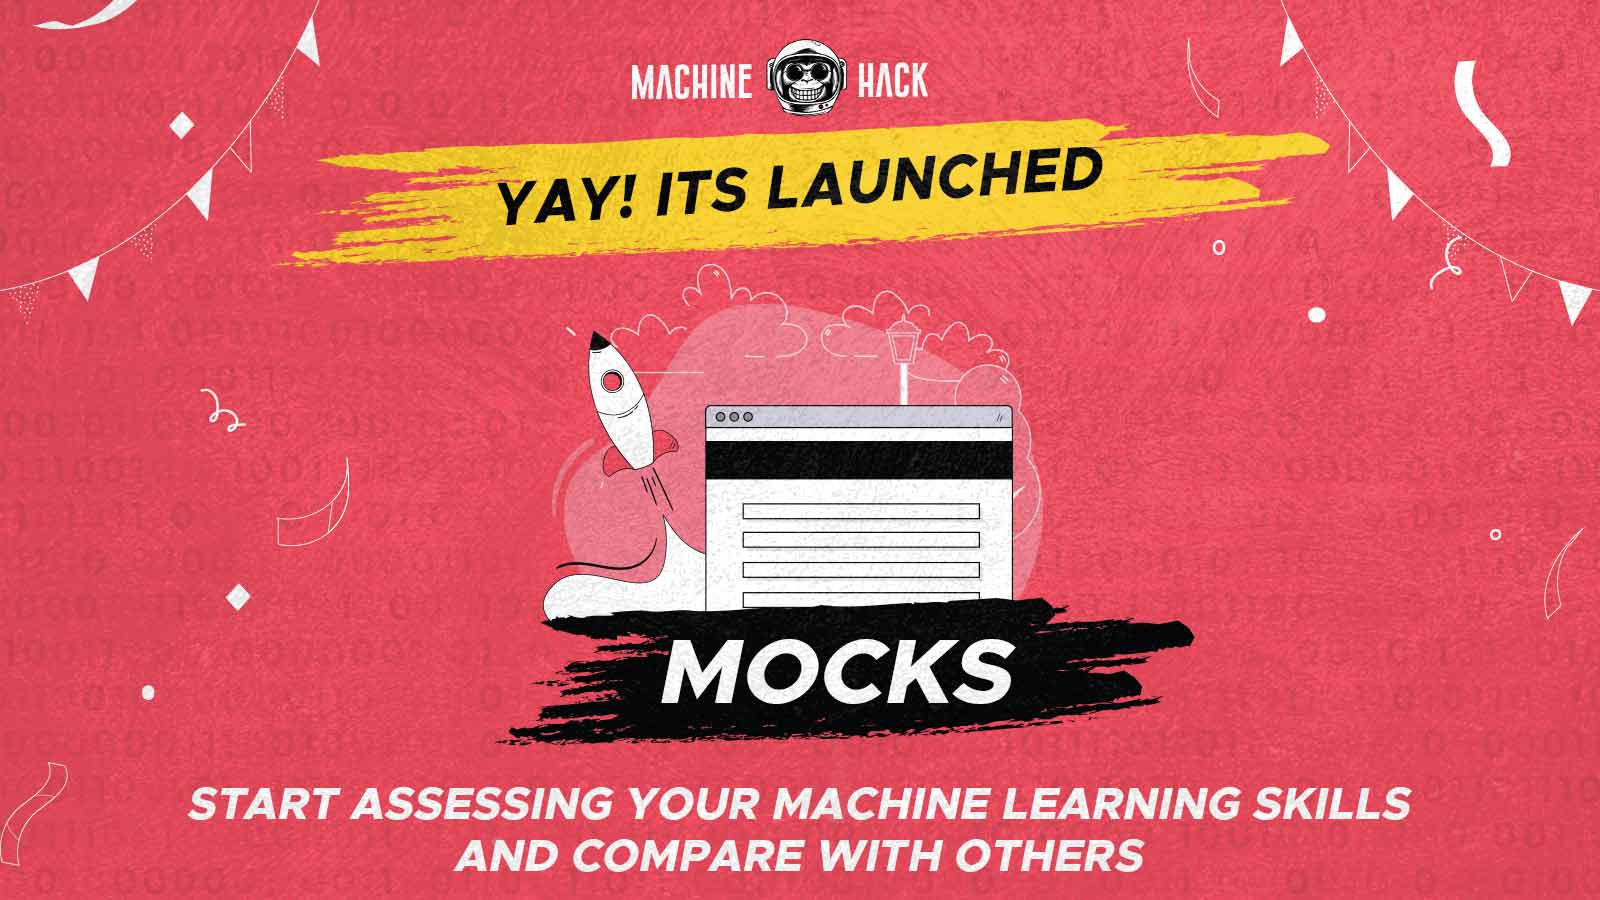 MachineHack Launches MOCKS — A Skill Assessment Module On Machine Learning